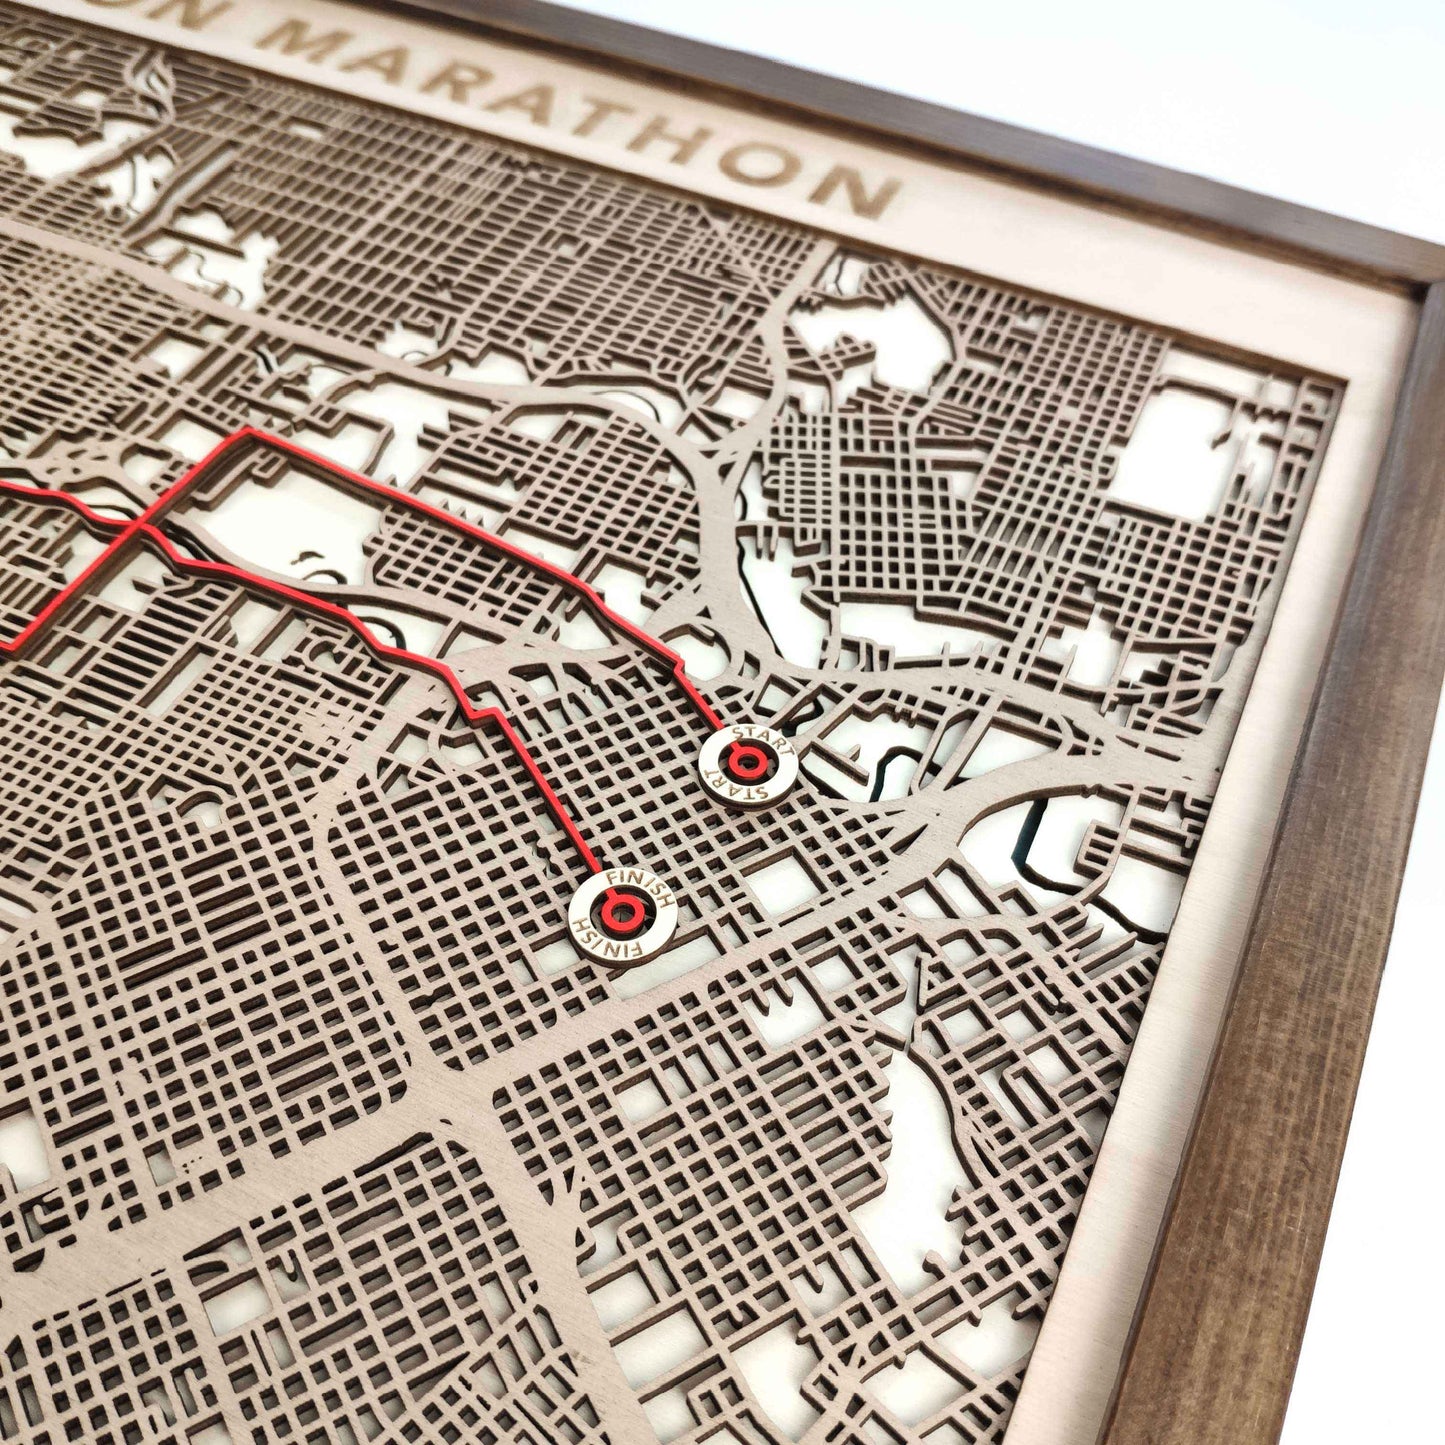 Houston Marathon Commemorative Wooden Route Map – Collector's Item by CityWood - Custom Wood Map Art - Unique Laser Cut Engraved - Anniversary Gift